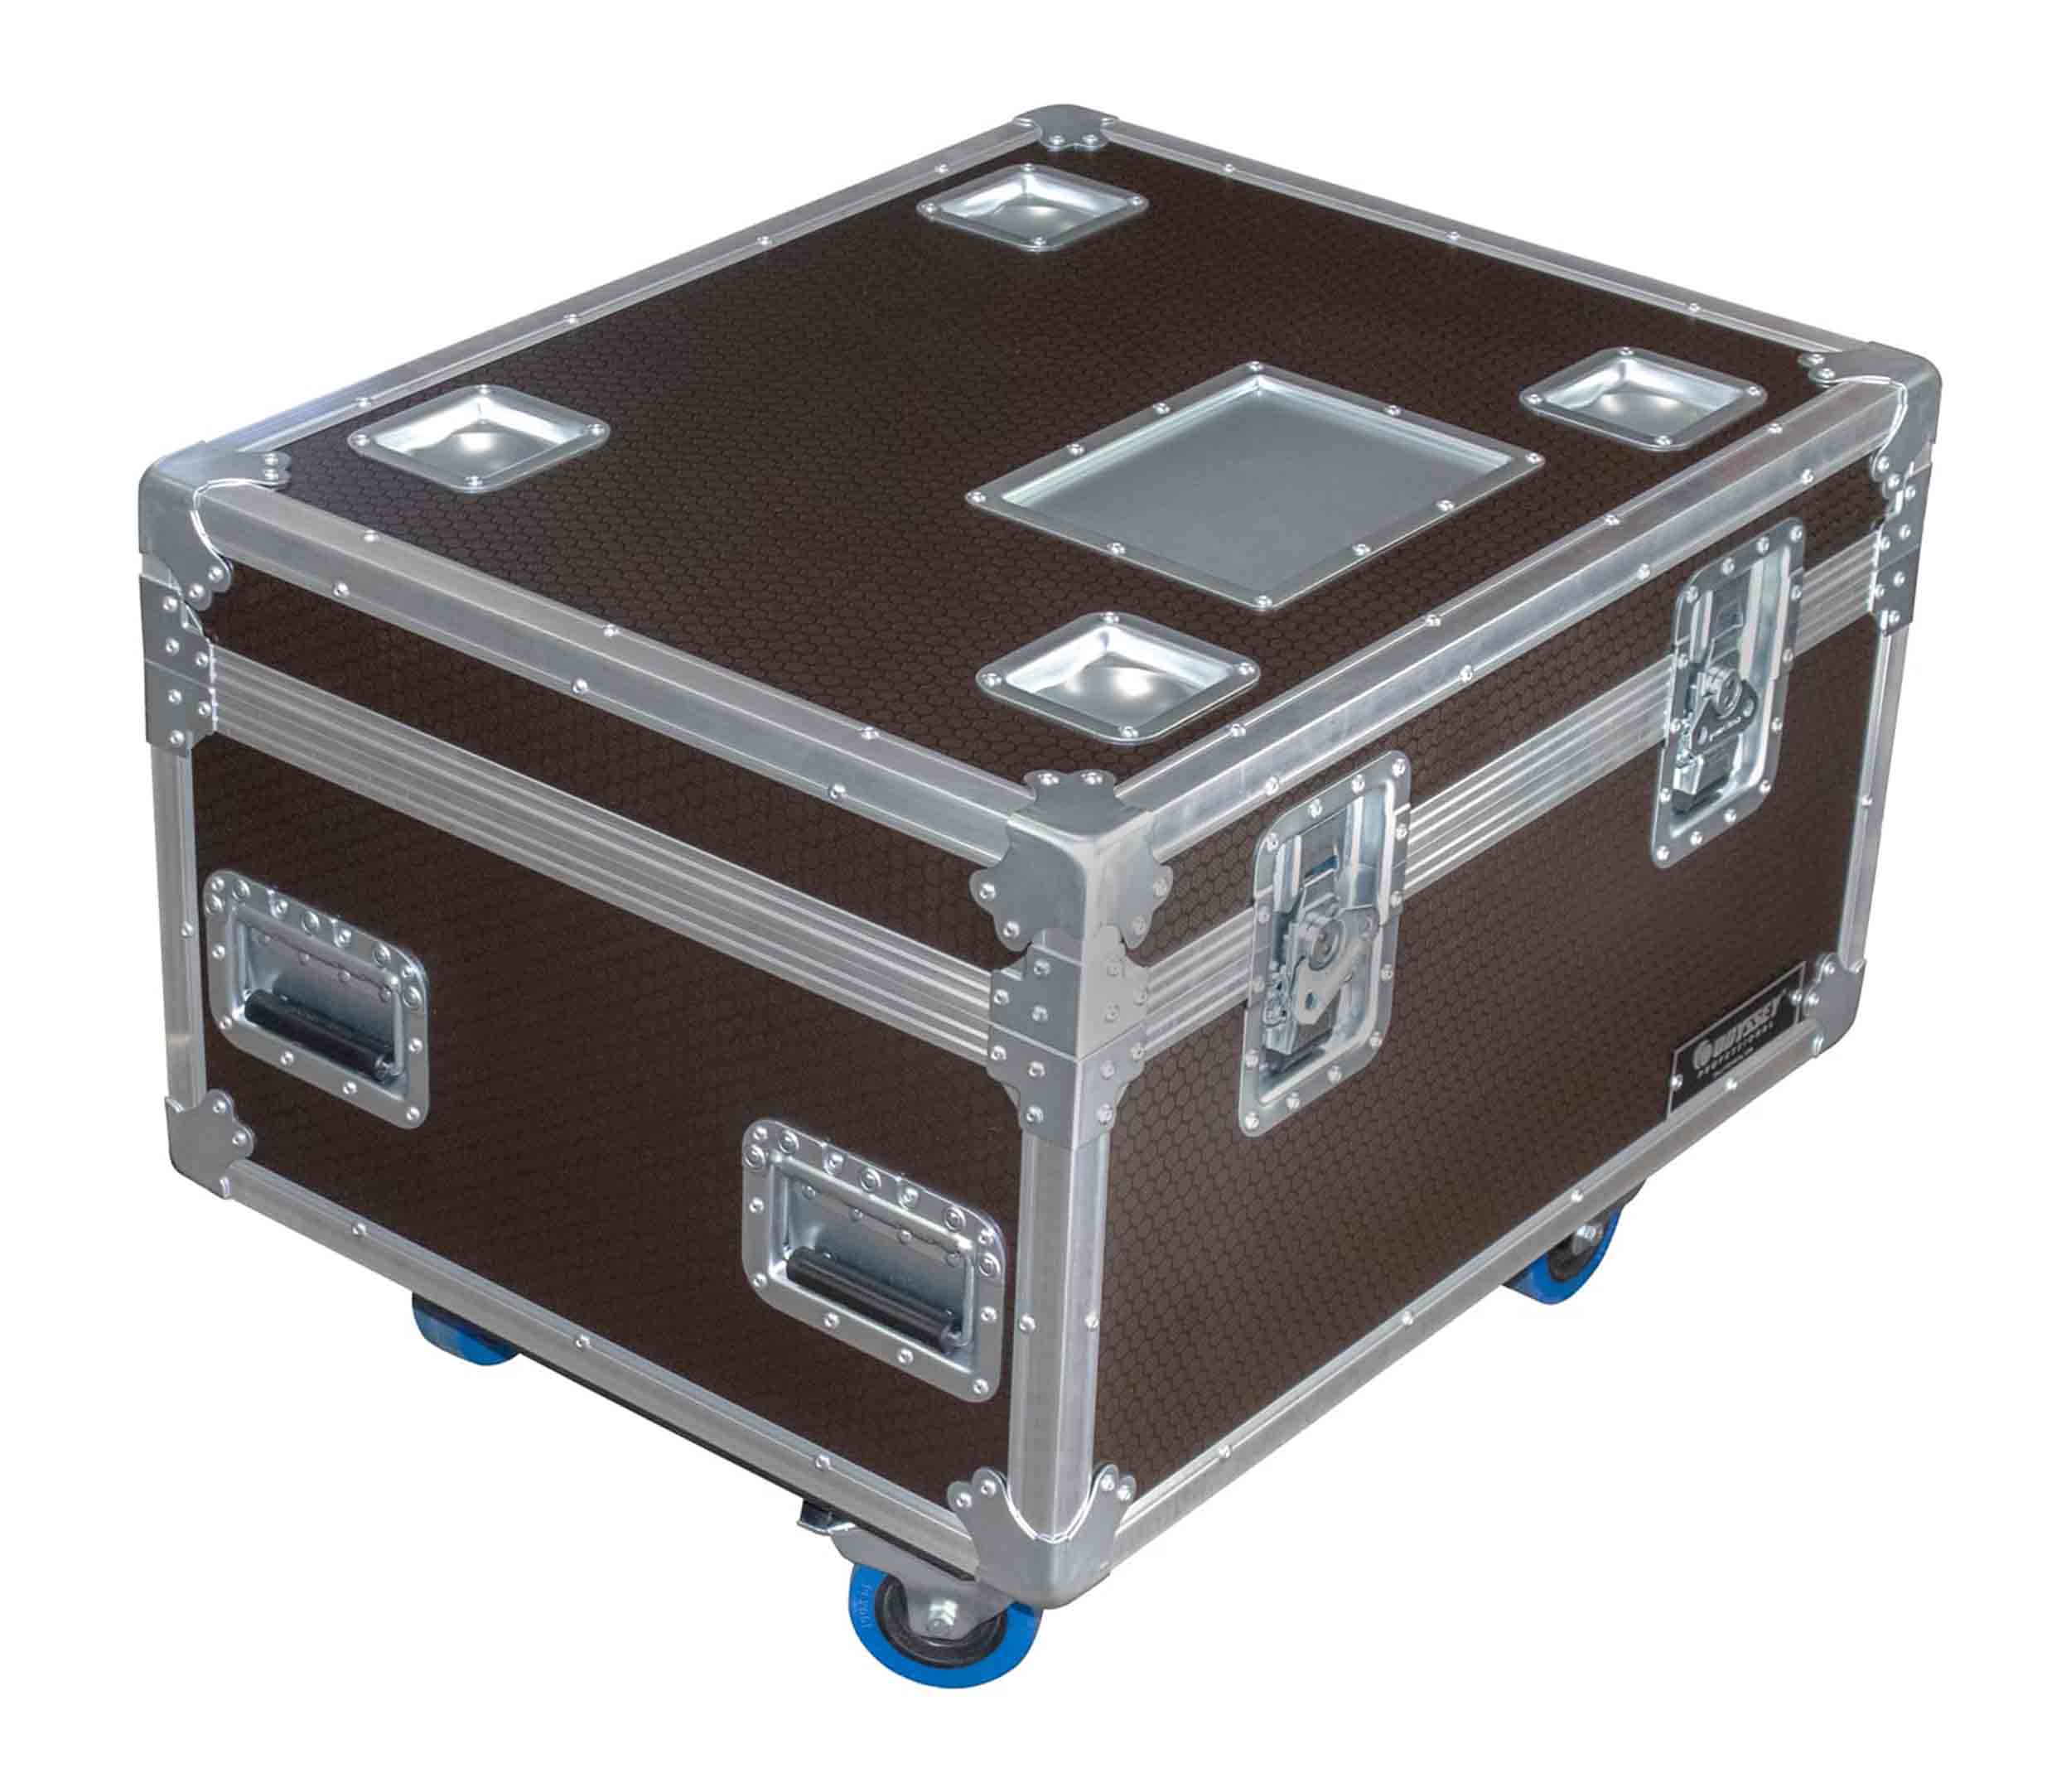 Odyssey OPT302422WBRN, Professional Brown Hex Board Utility Tour Trunk Case with Caster Wheels by Odyssey